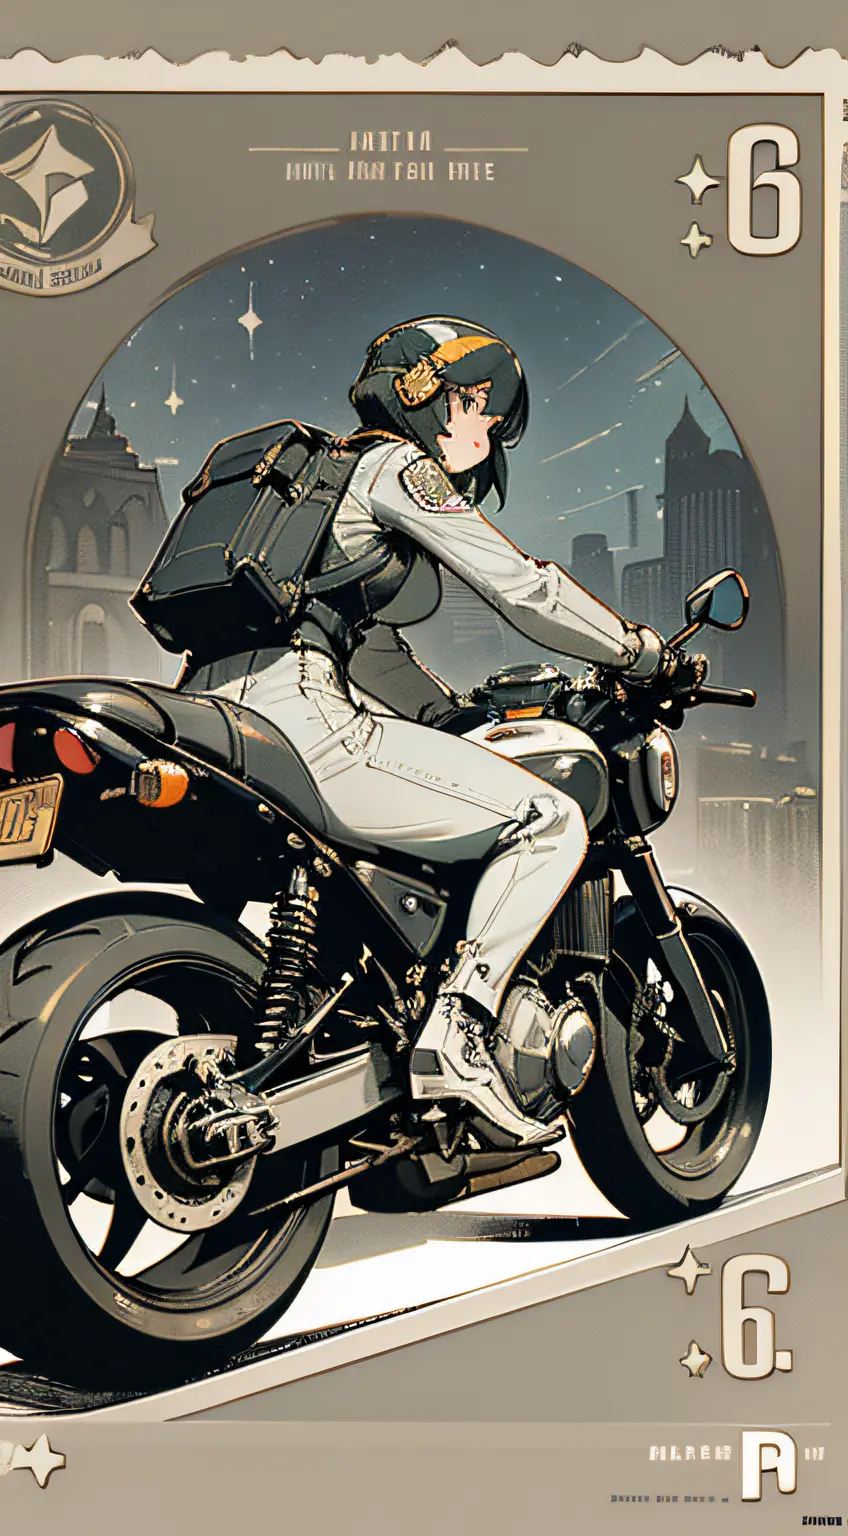 (high resolution),(masterpiece), (best quality), (best detail), (distant general view), (postage stamp),(main color of illustration: metallic gray), (secondary color: ivory white), a cafe racer motorcycle driven by a woman with challenging stance, very det...